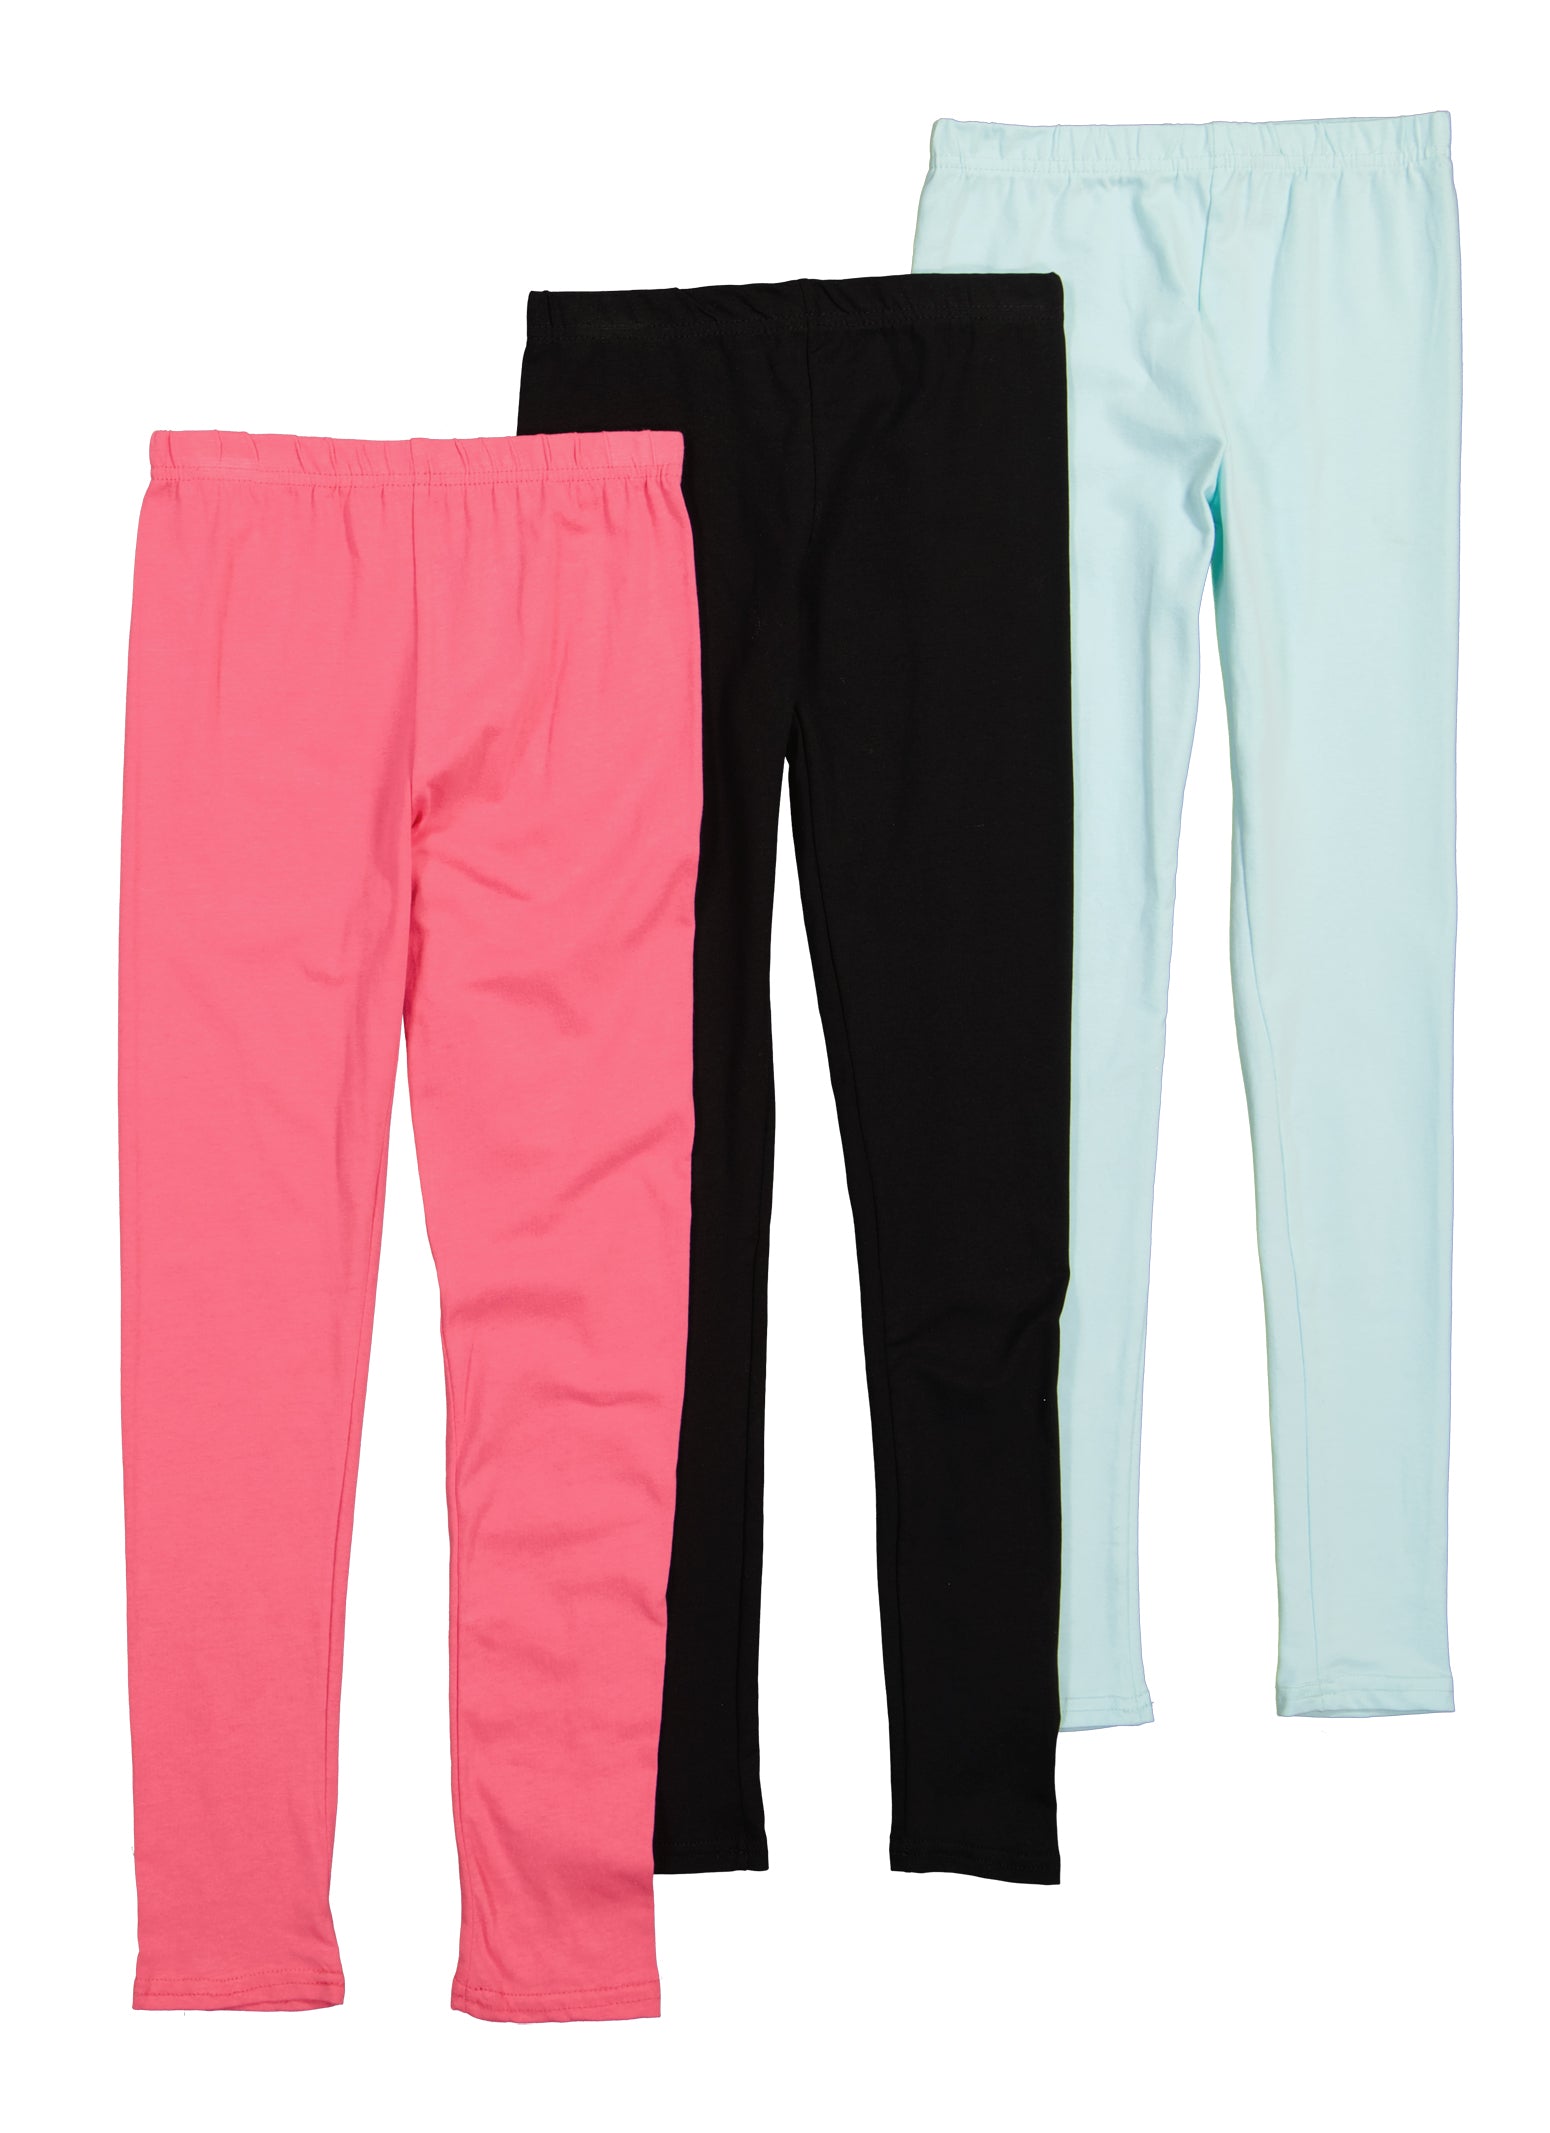 Girls Pants and Leggings, Everyday Low Prices